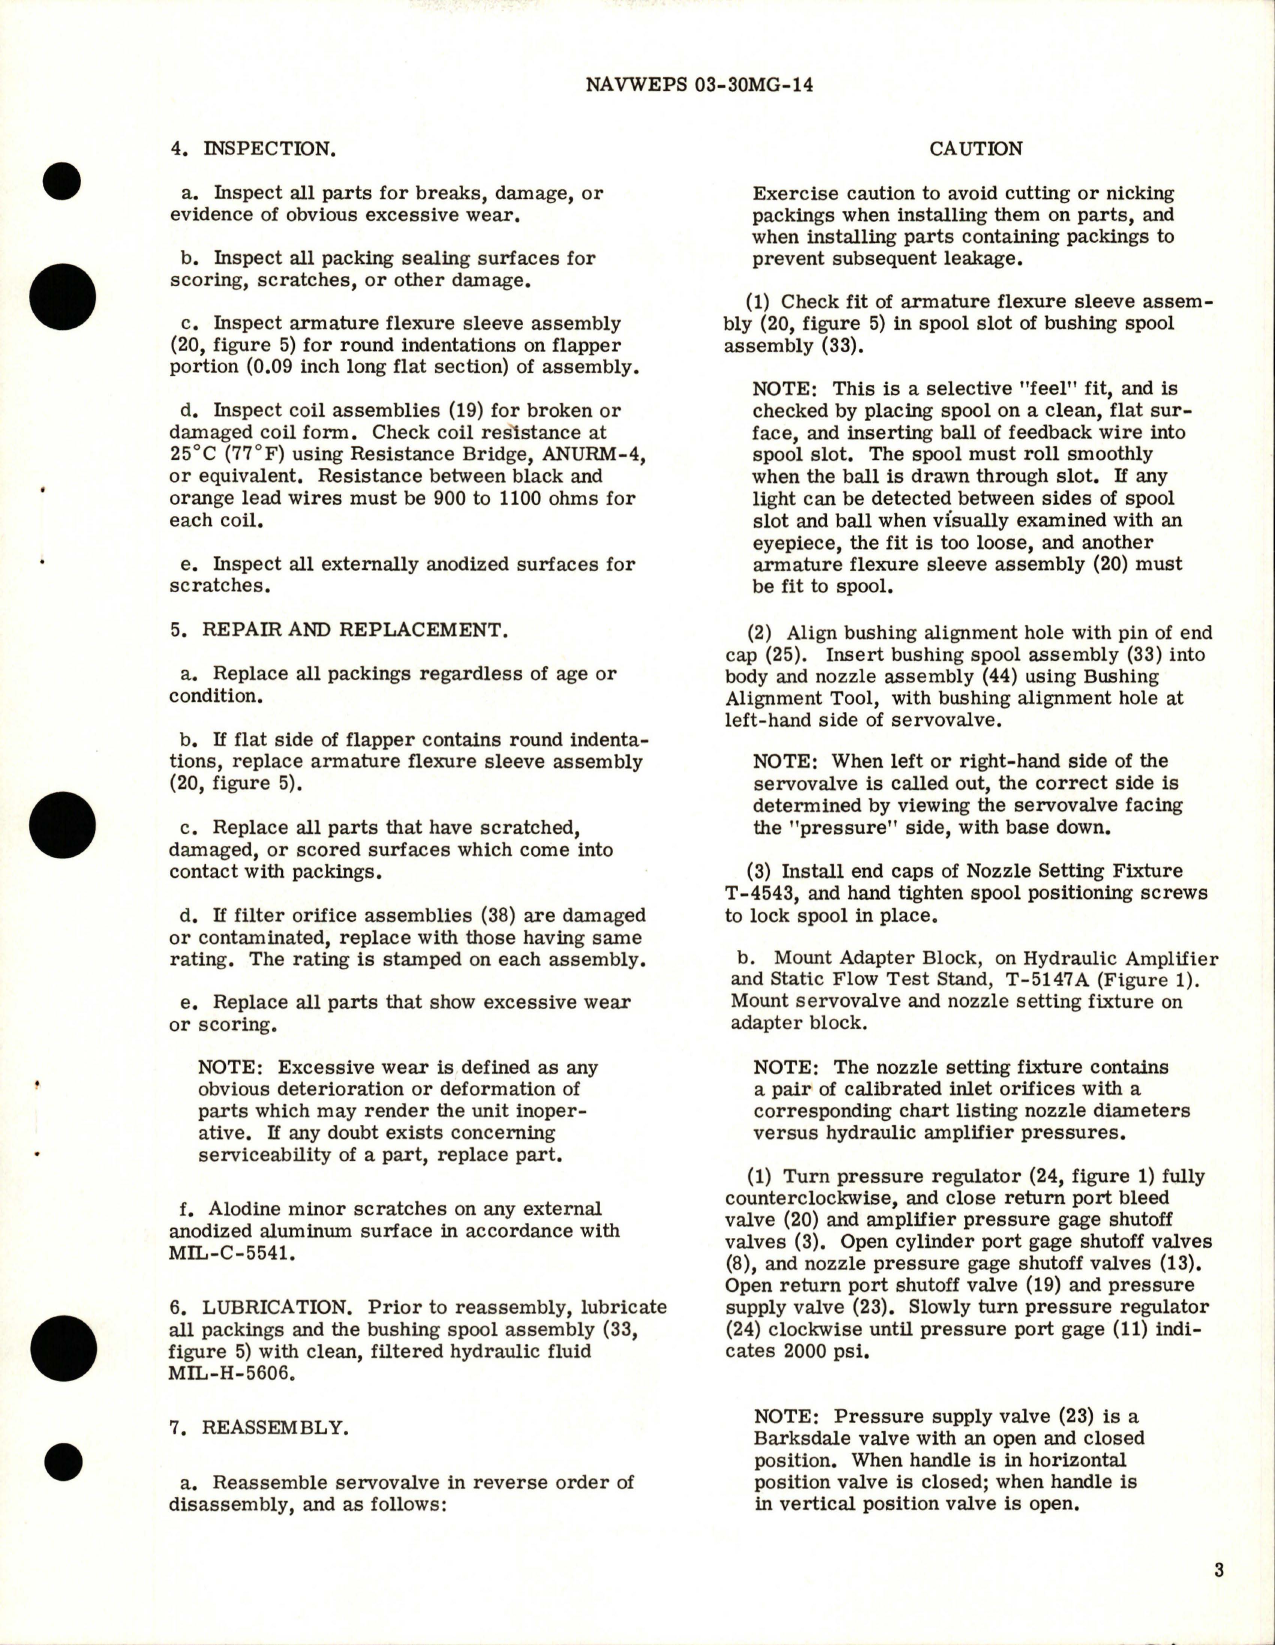 Sample page 5 from AirCorps Library document: Overhaul Instructions with Illustrated Parts Breakdown for Servovalve - Model 31-256 - Part 010-28427 